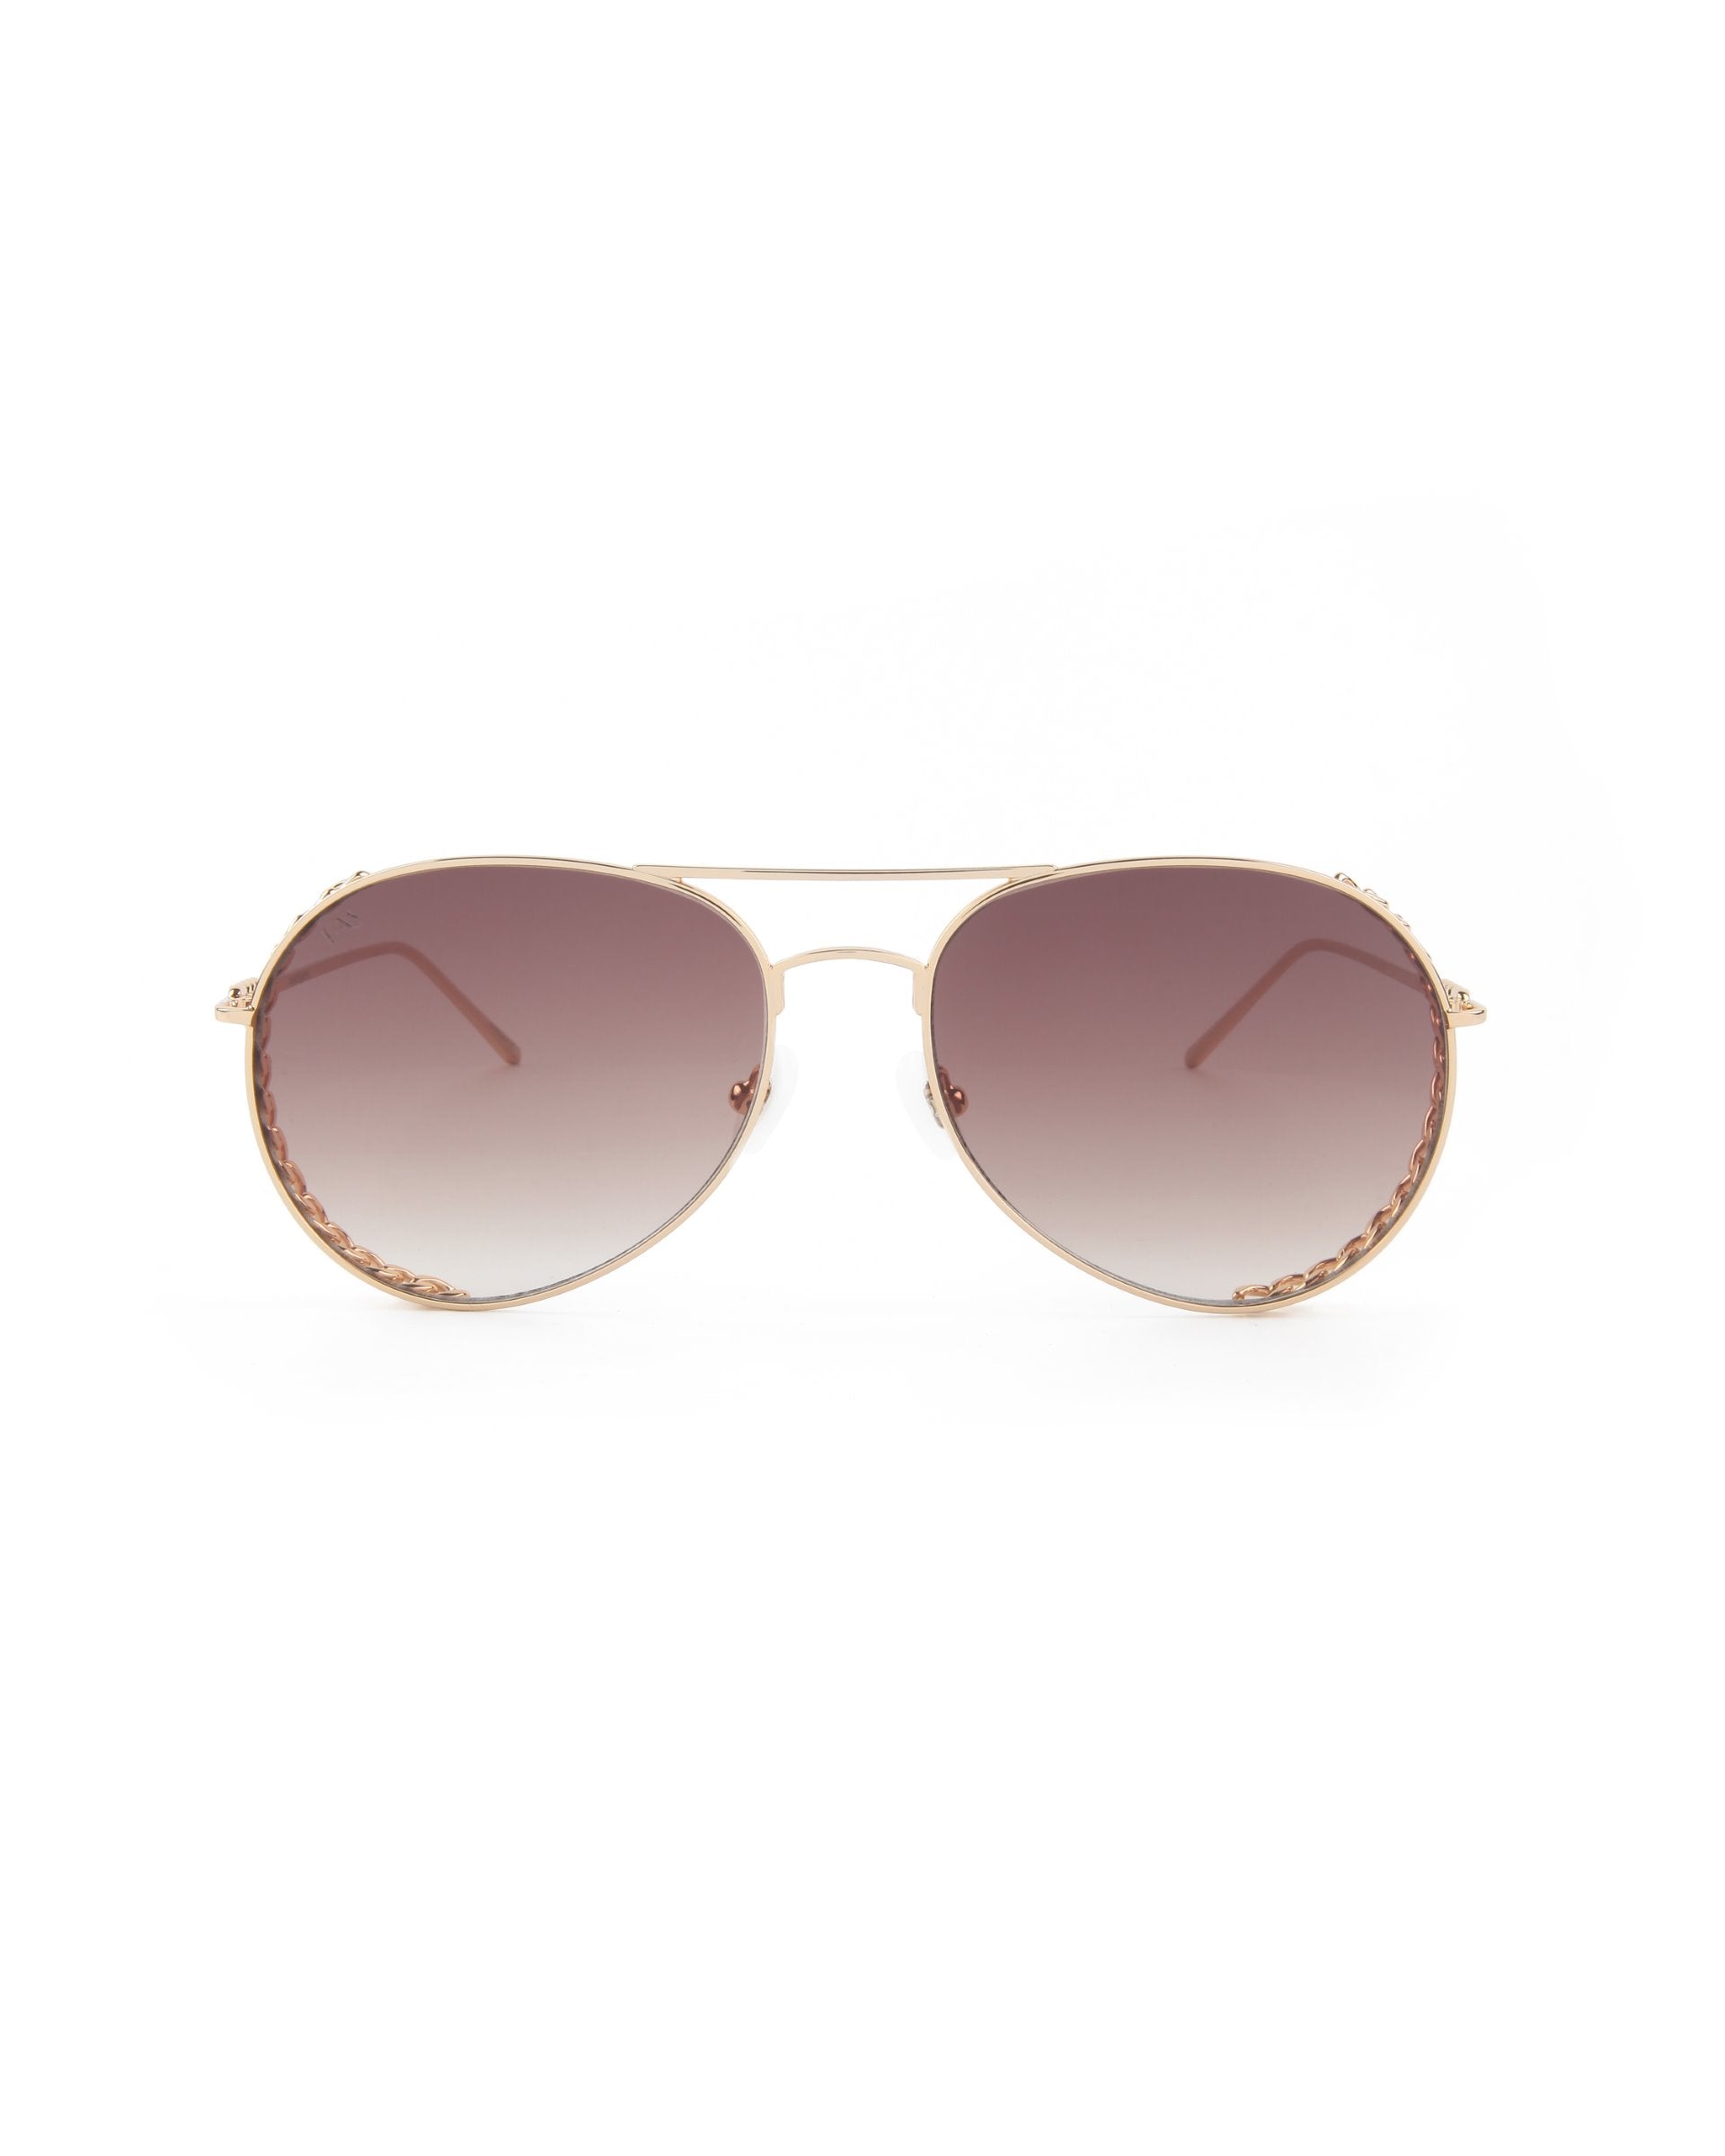 A pair of aviator-style Links sunglasses from For Art&#39;s Sake® with gold-plated stainless steel frames and gradient brown nylon lenses. The arms feature a partial gold chain link design near the hinges. The sunglasses are displayed on a white background.